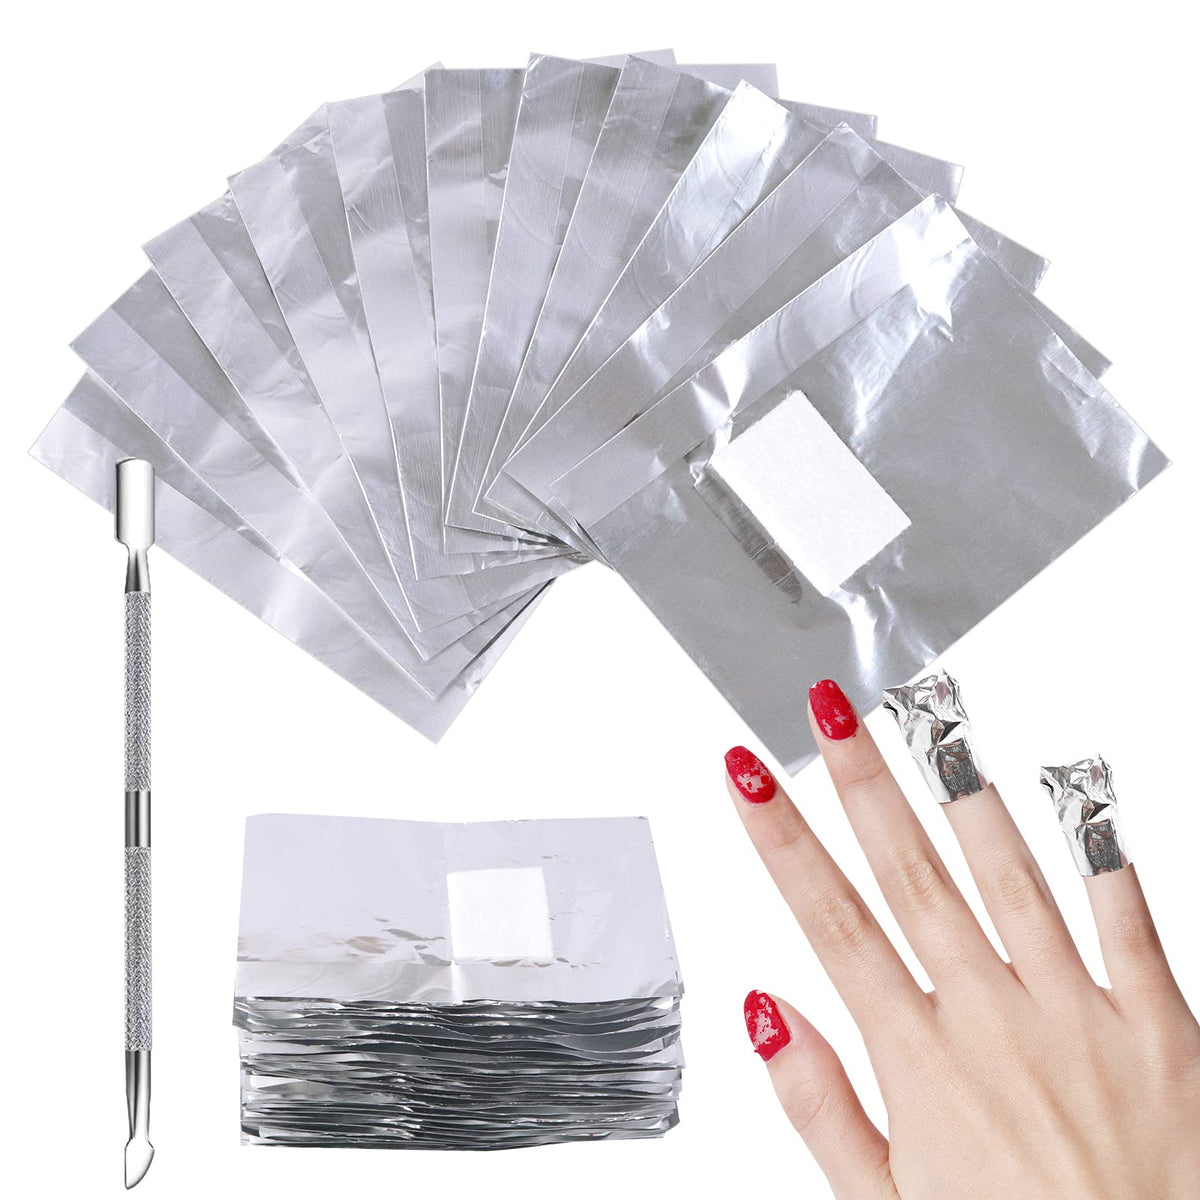 Sularpek Foil Nail Wraps, 200 Pcs Gel Nail Remover Wraps With 1pcs Cuticle Pusher, Nail Foils For Gel Nails For Fast & Gentle Soak Off Gel Polish Removing